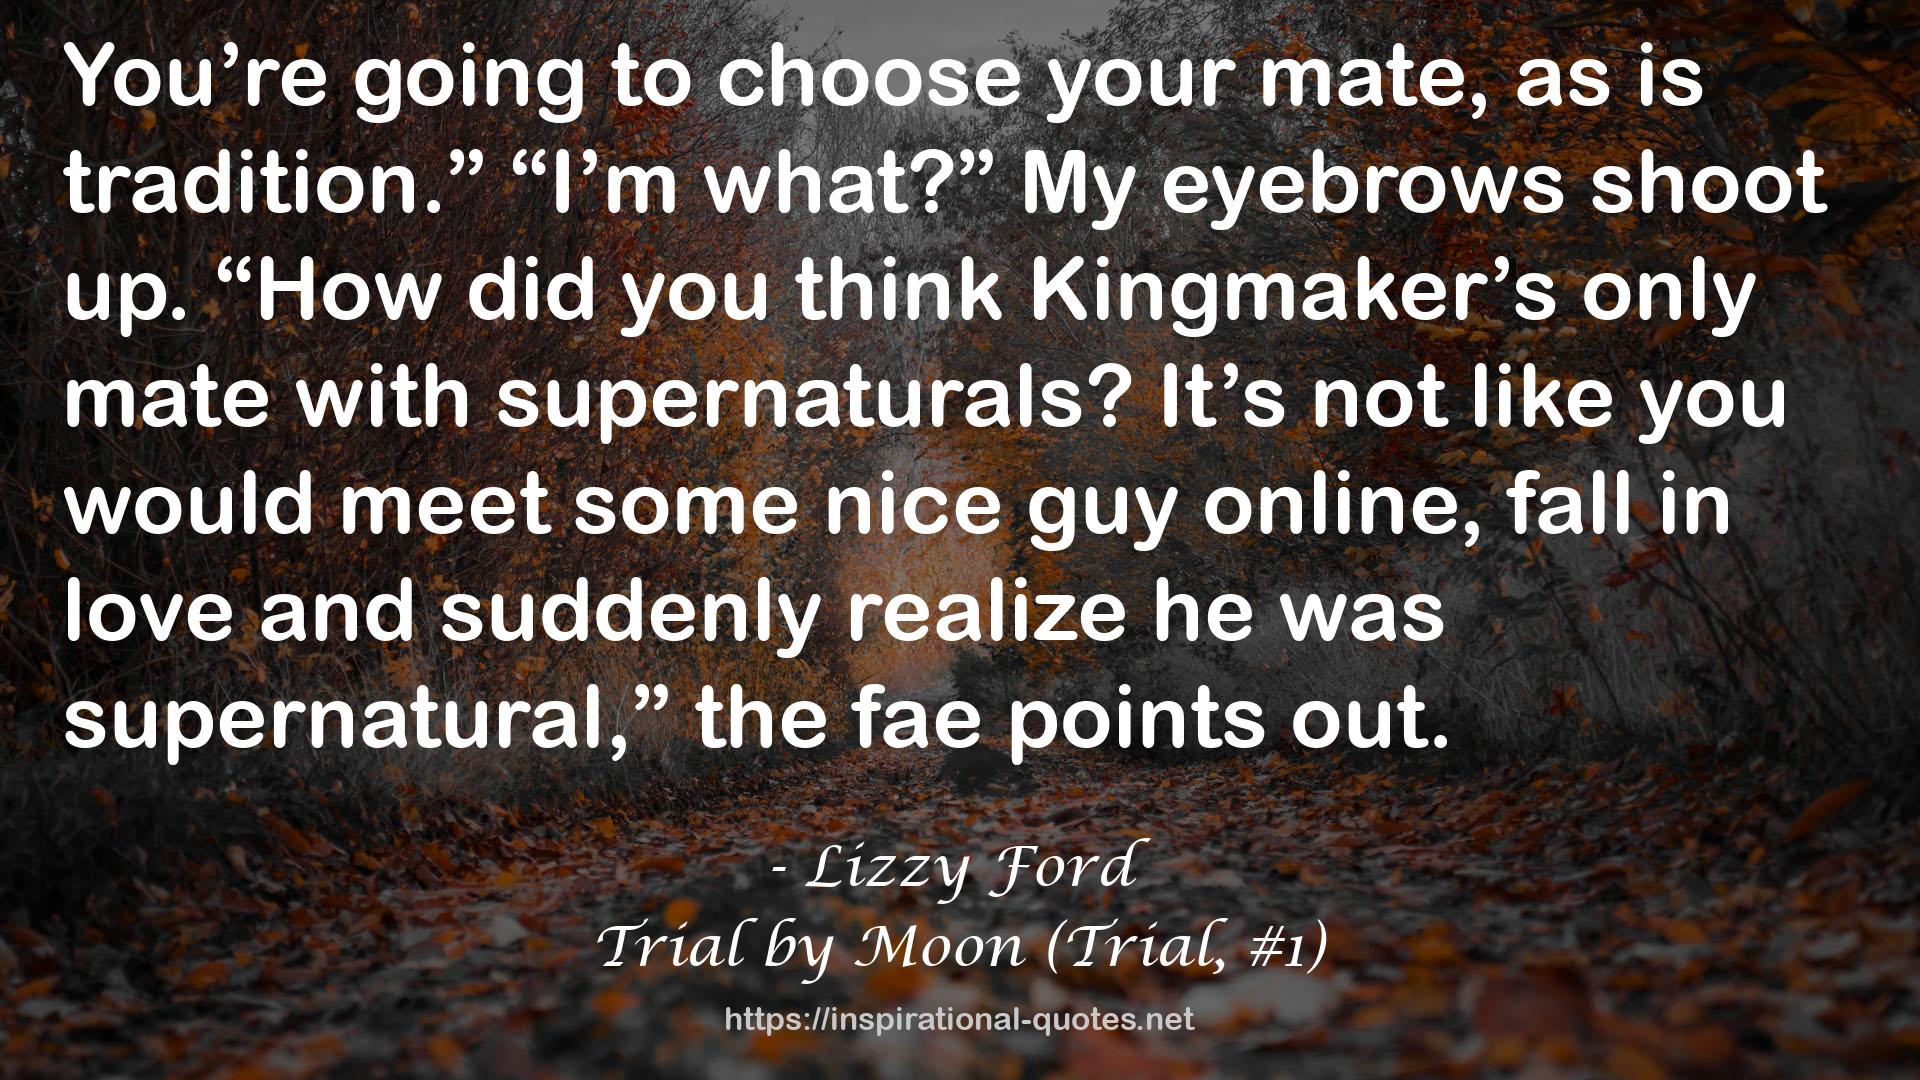 Trial by Moon (Trial, #1) QUOTES